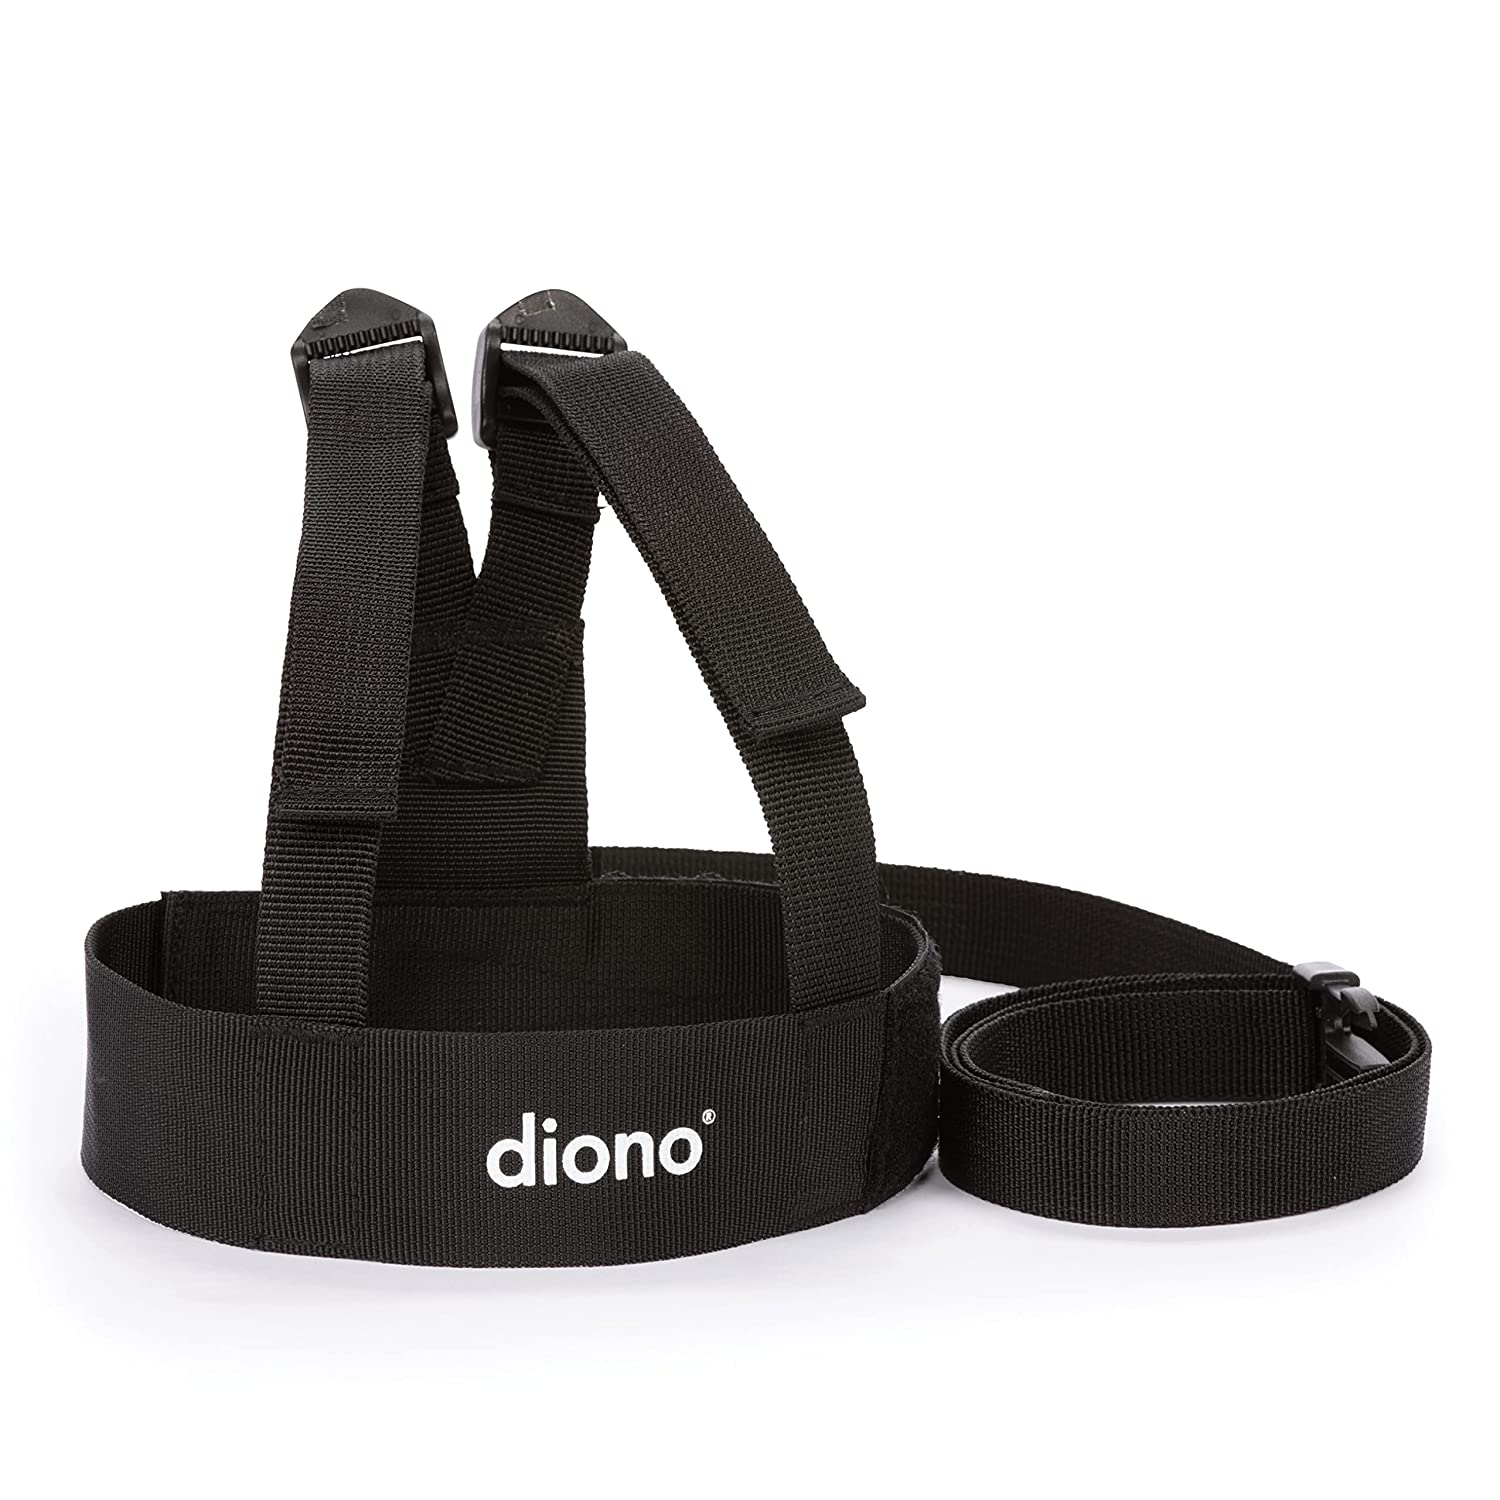 Diono Sure Steps Toddler Leash & Harness for Child Safety, with Shoulder Straps for Child Comfort
